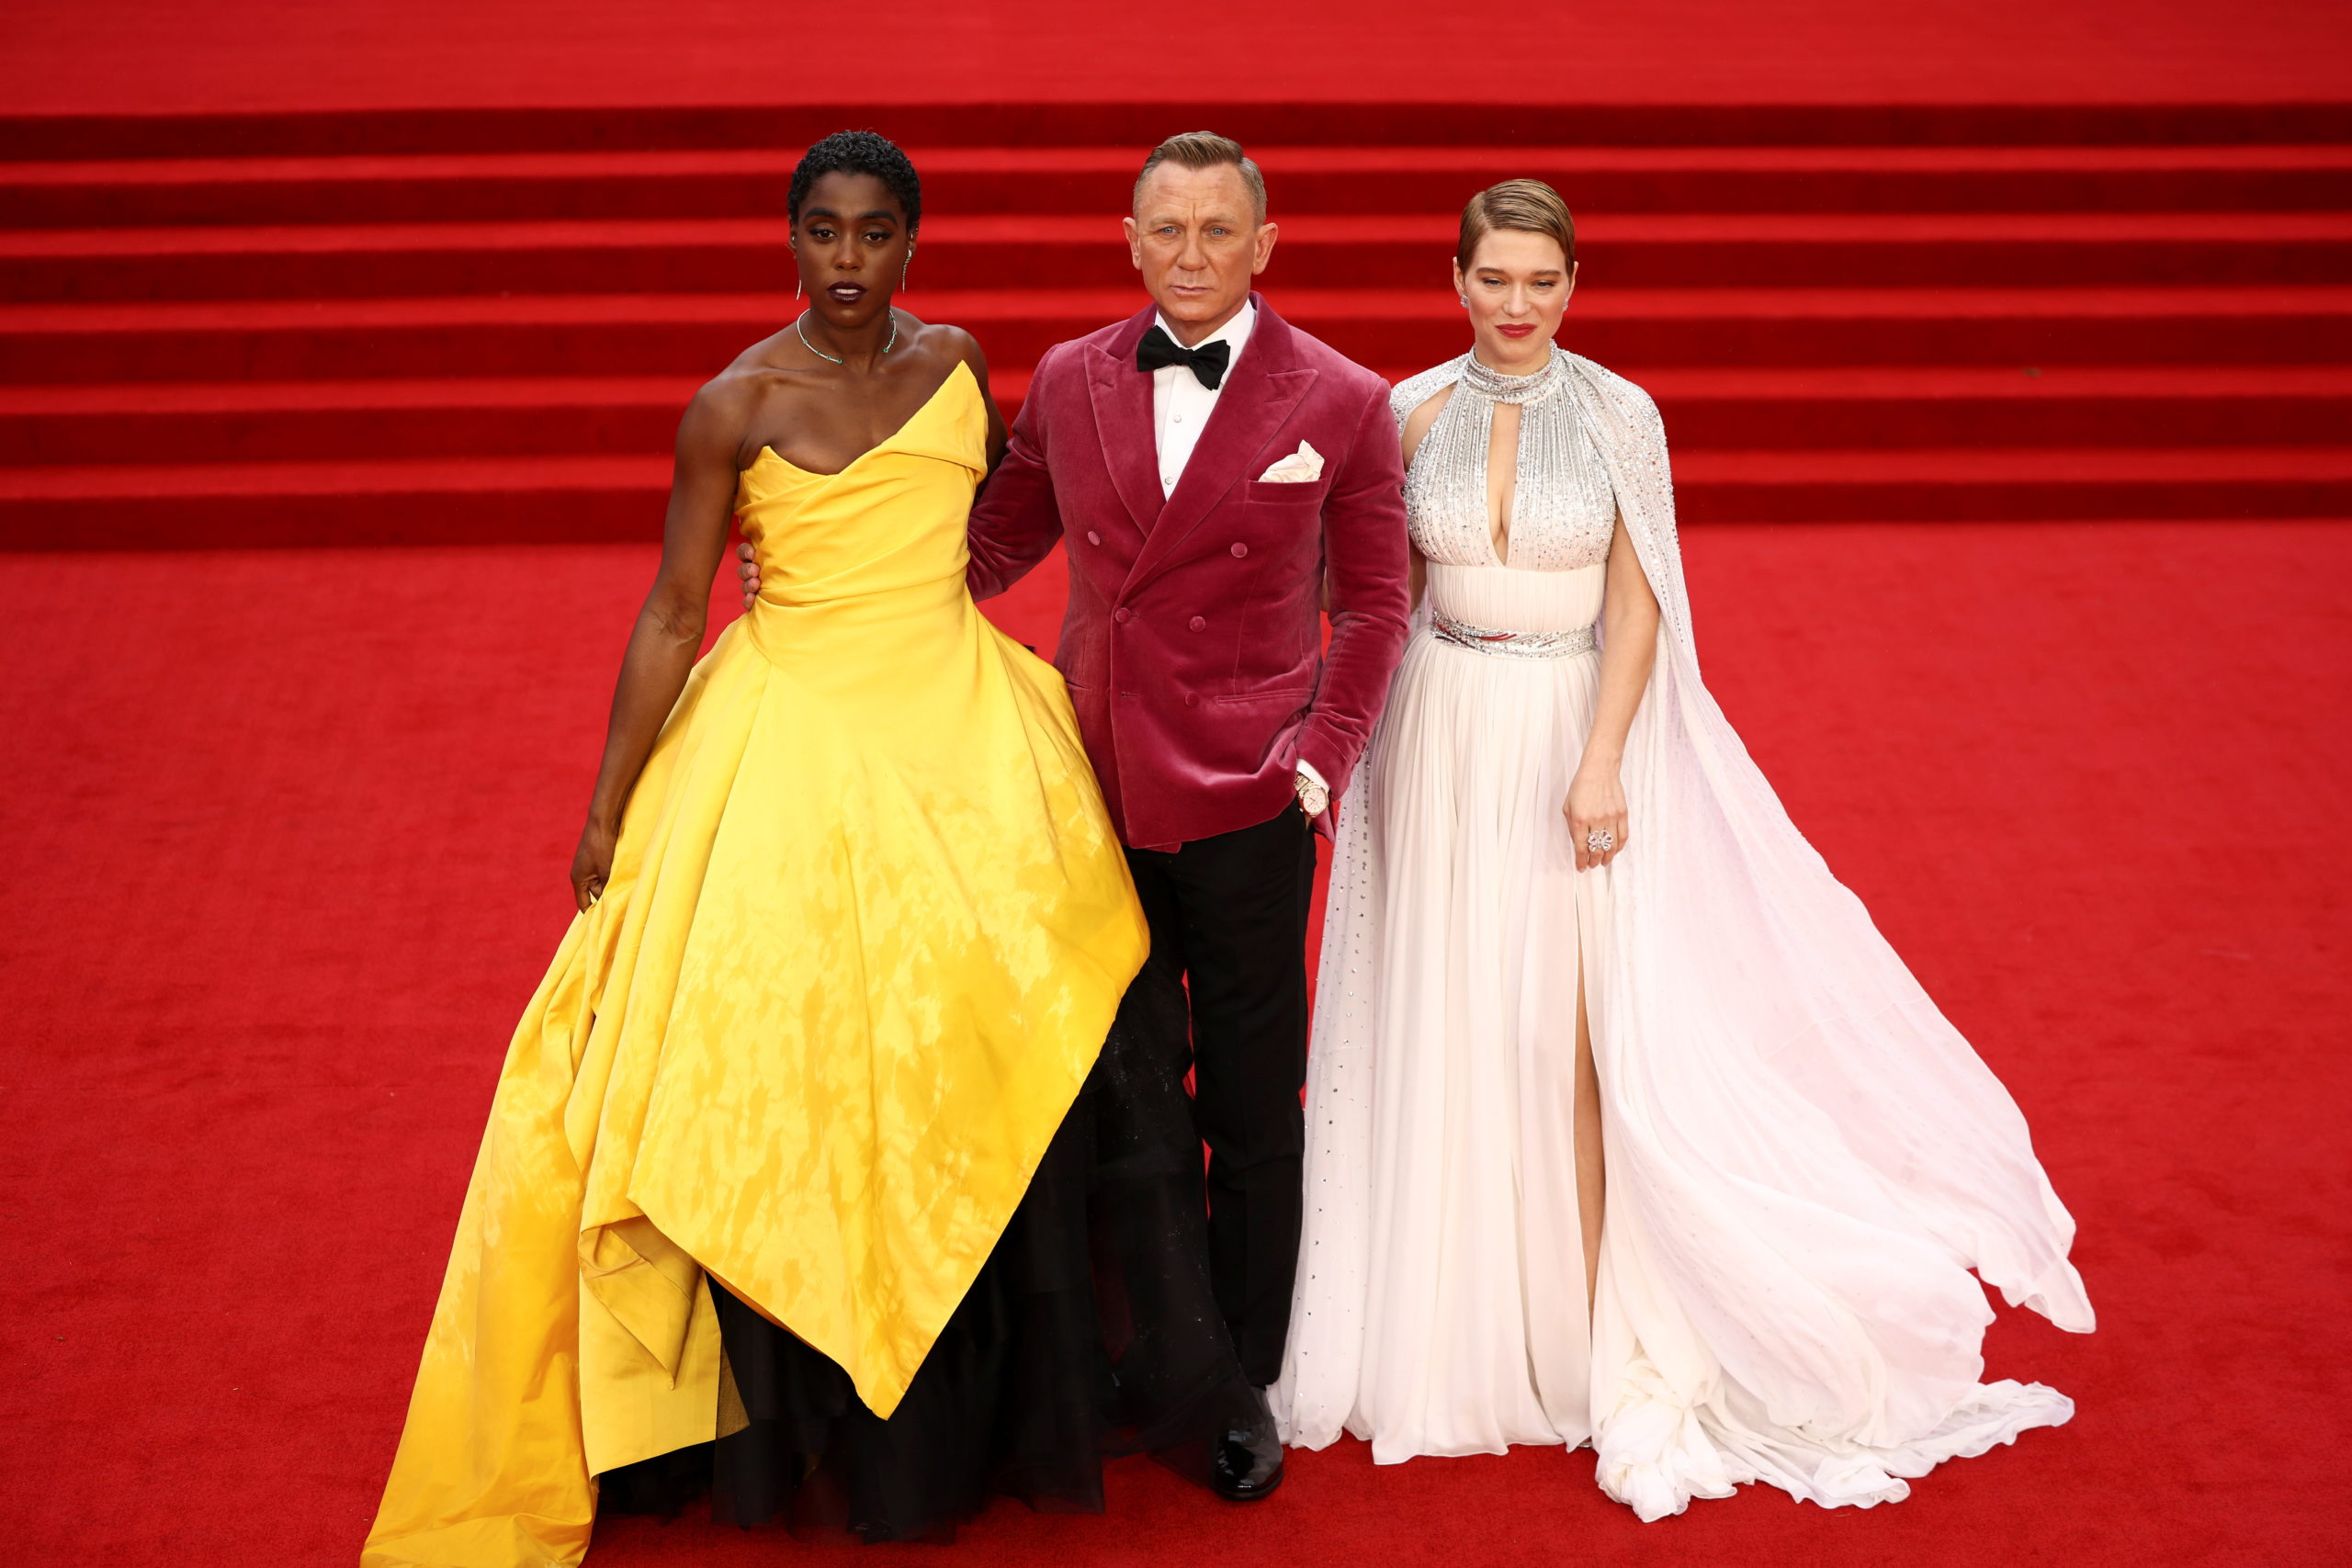 Lashana Lynch, Daniel Craig and Lea Seydoux pose during the world premiere of the new James Bond film "No Time To Die" at the Royal Albert Hall in London, Britain